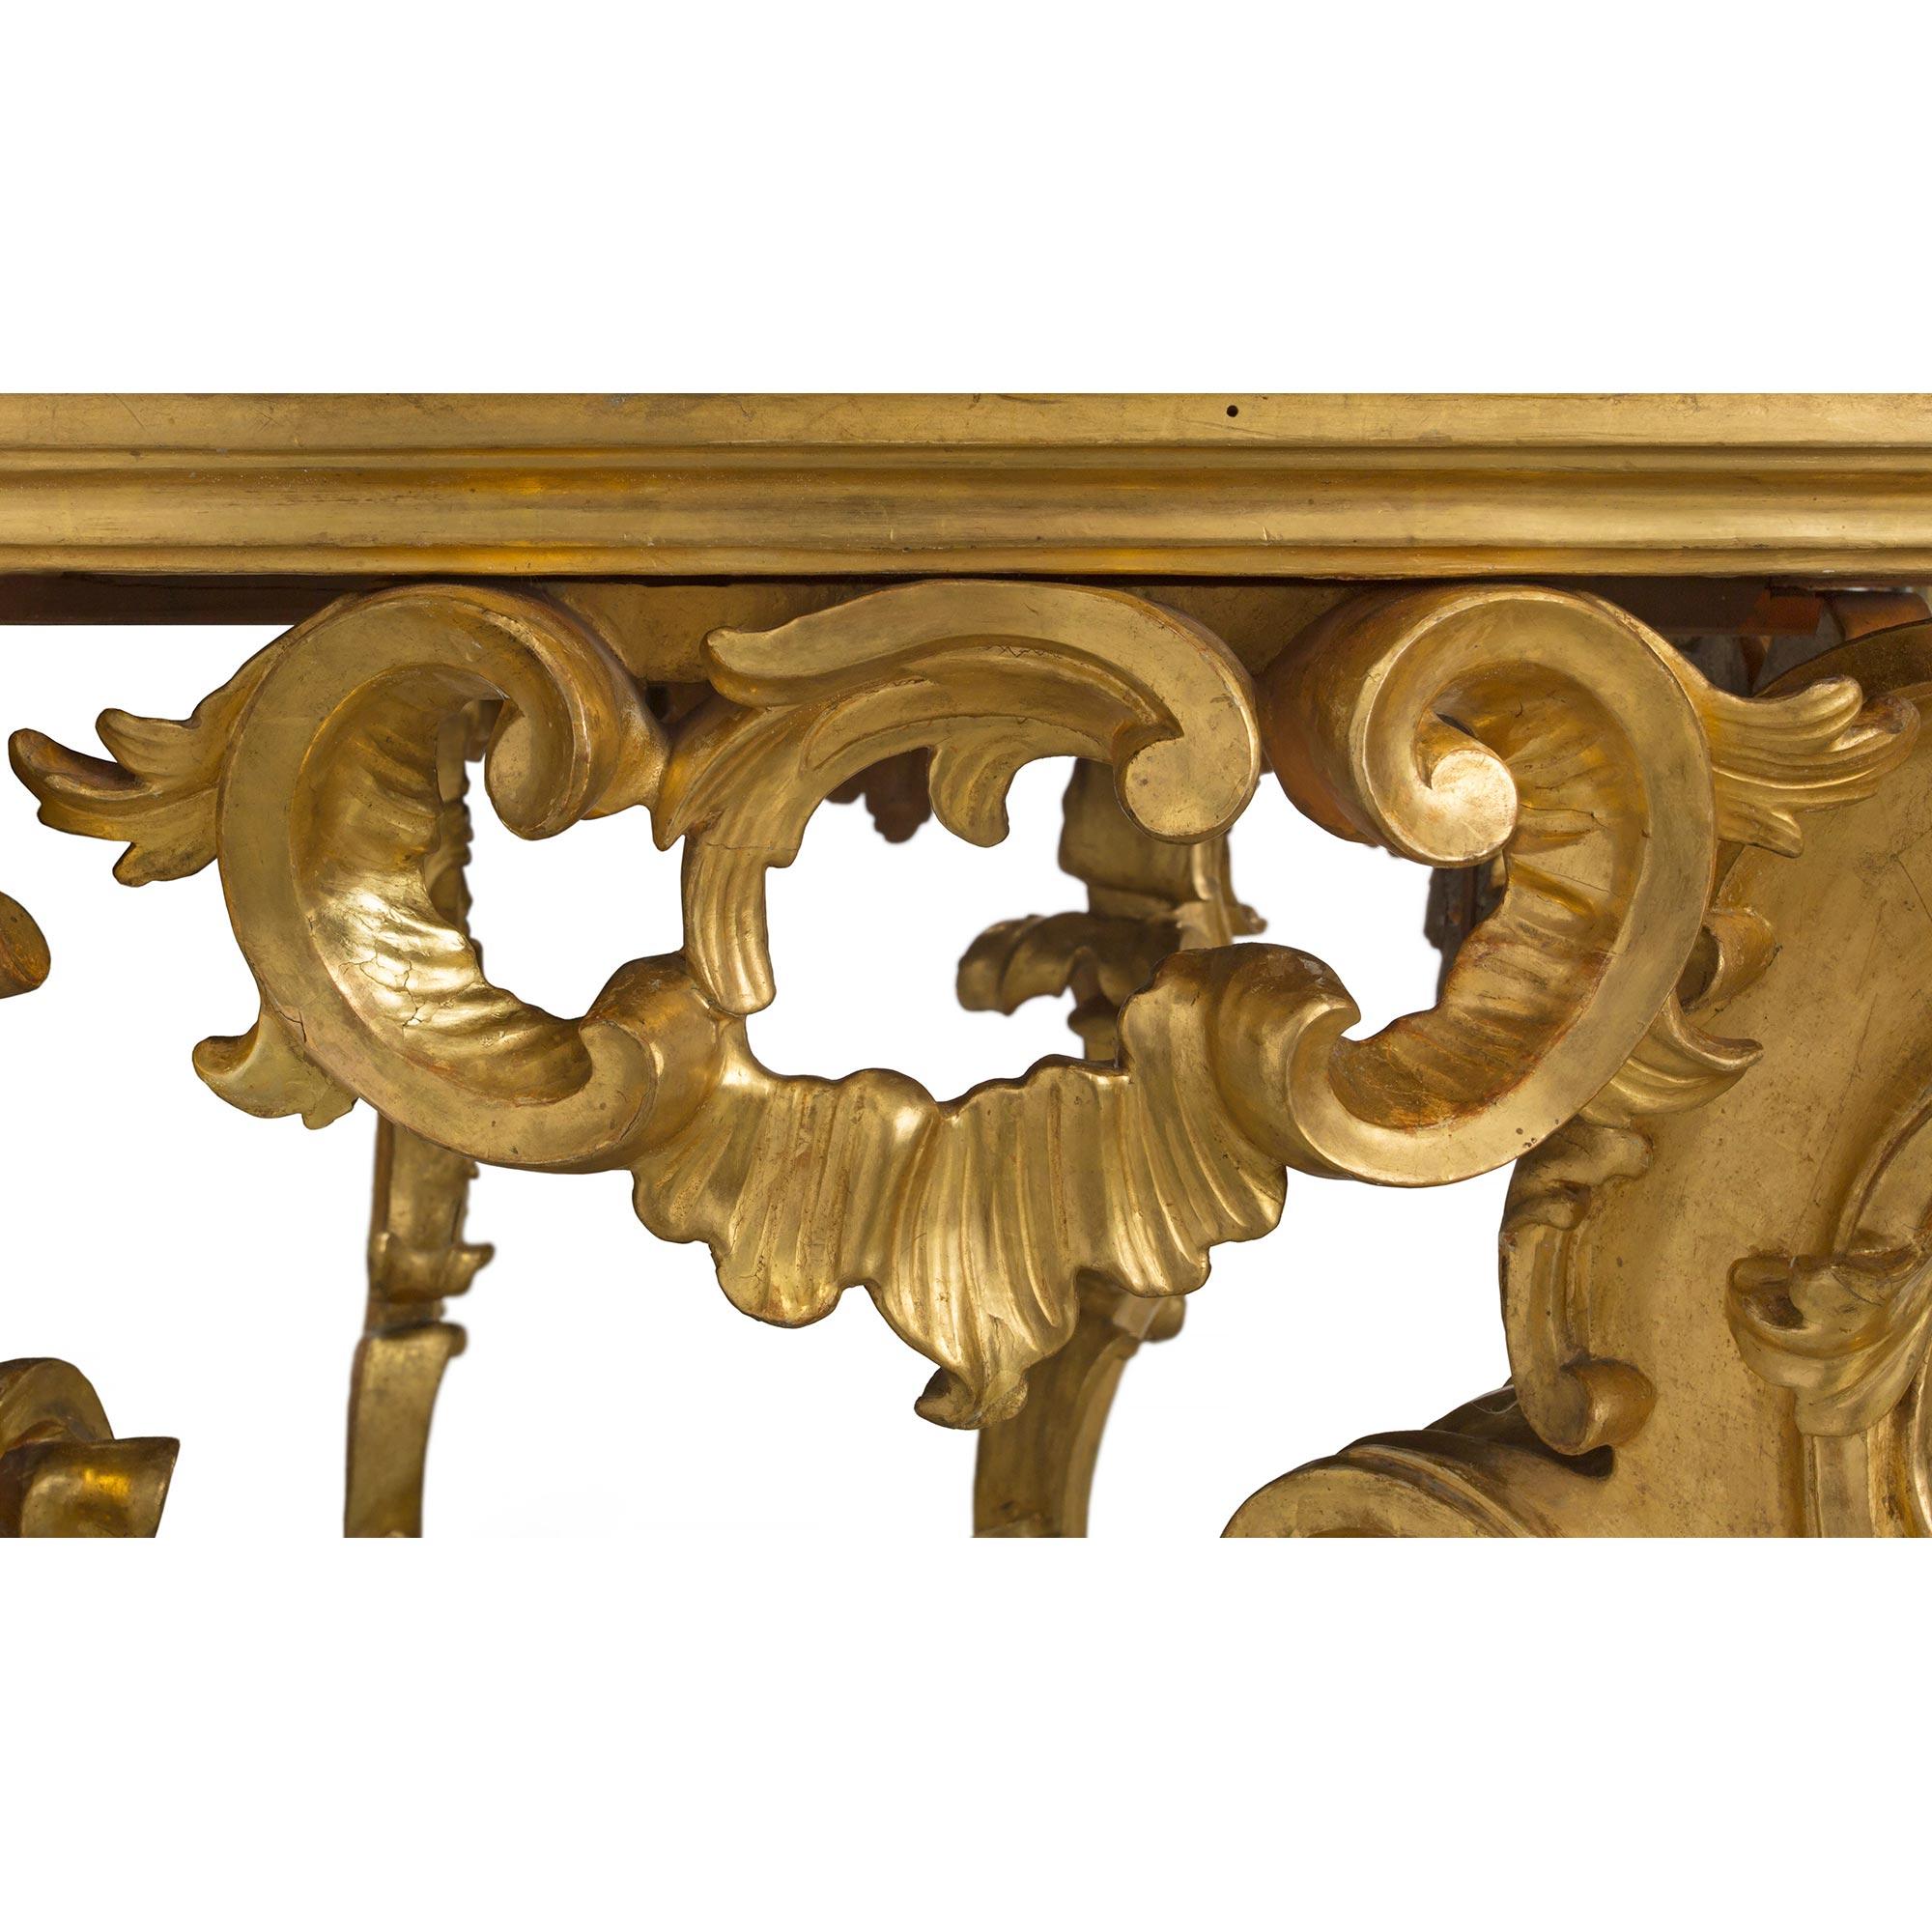 Italian 18th Century Finely Carved Giltwood and Marble Roman Console For Sale 3